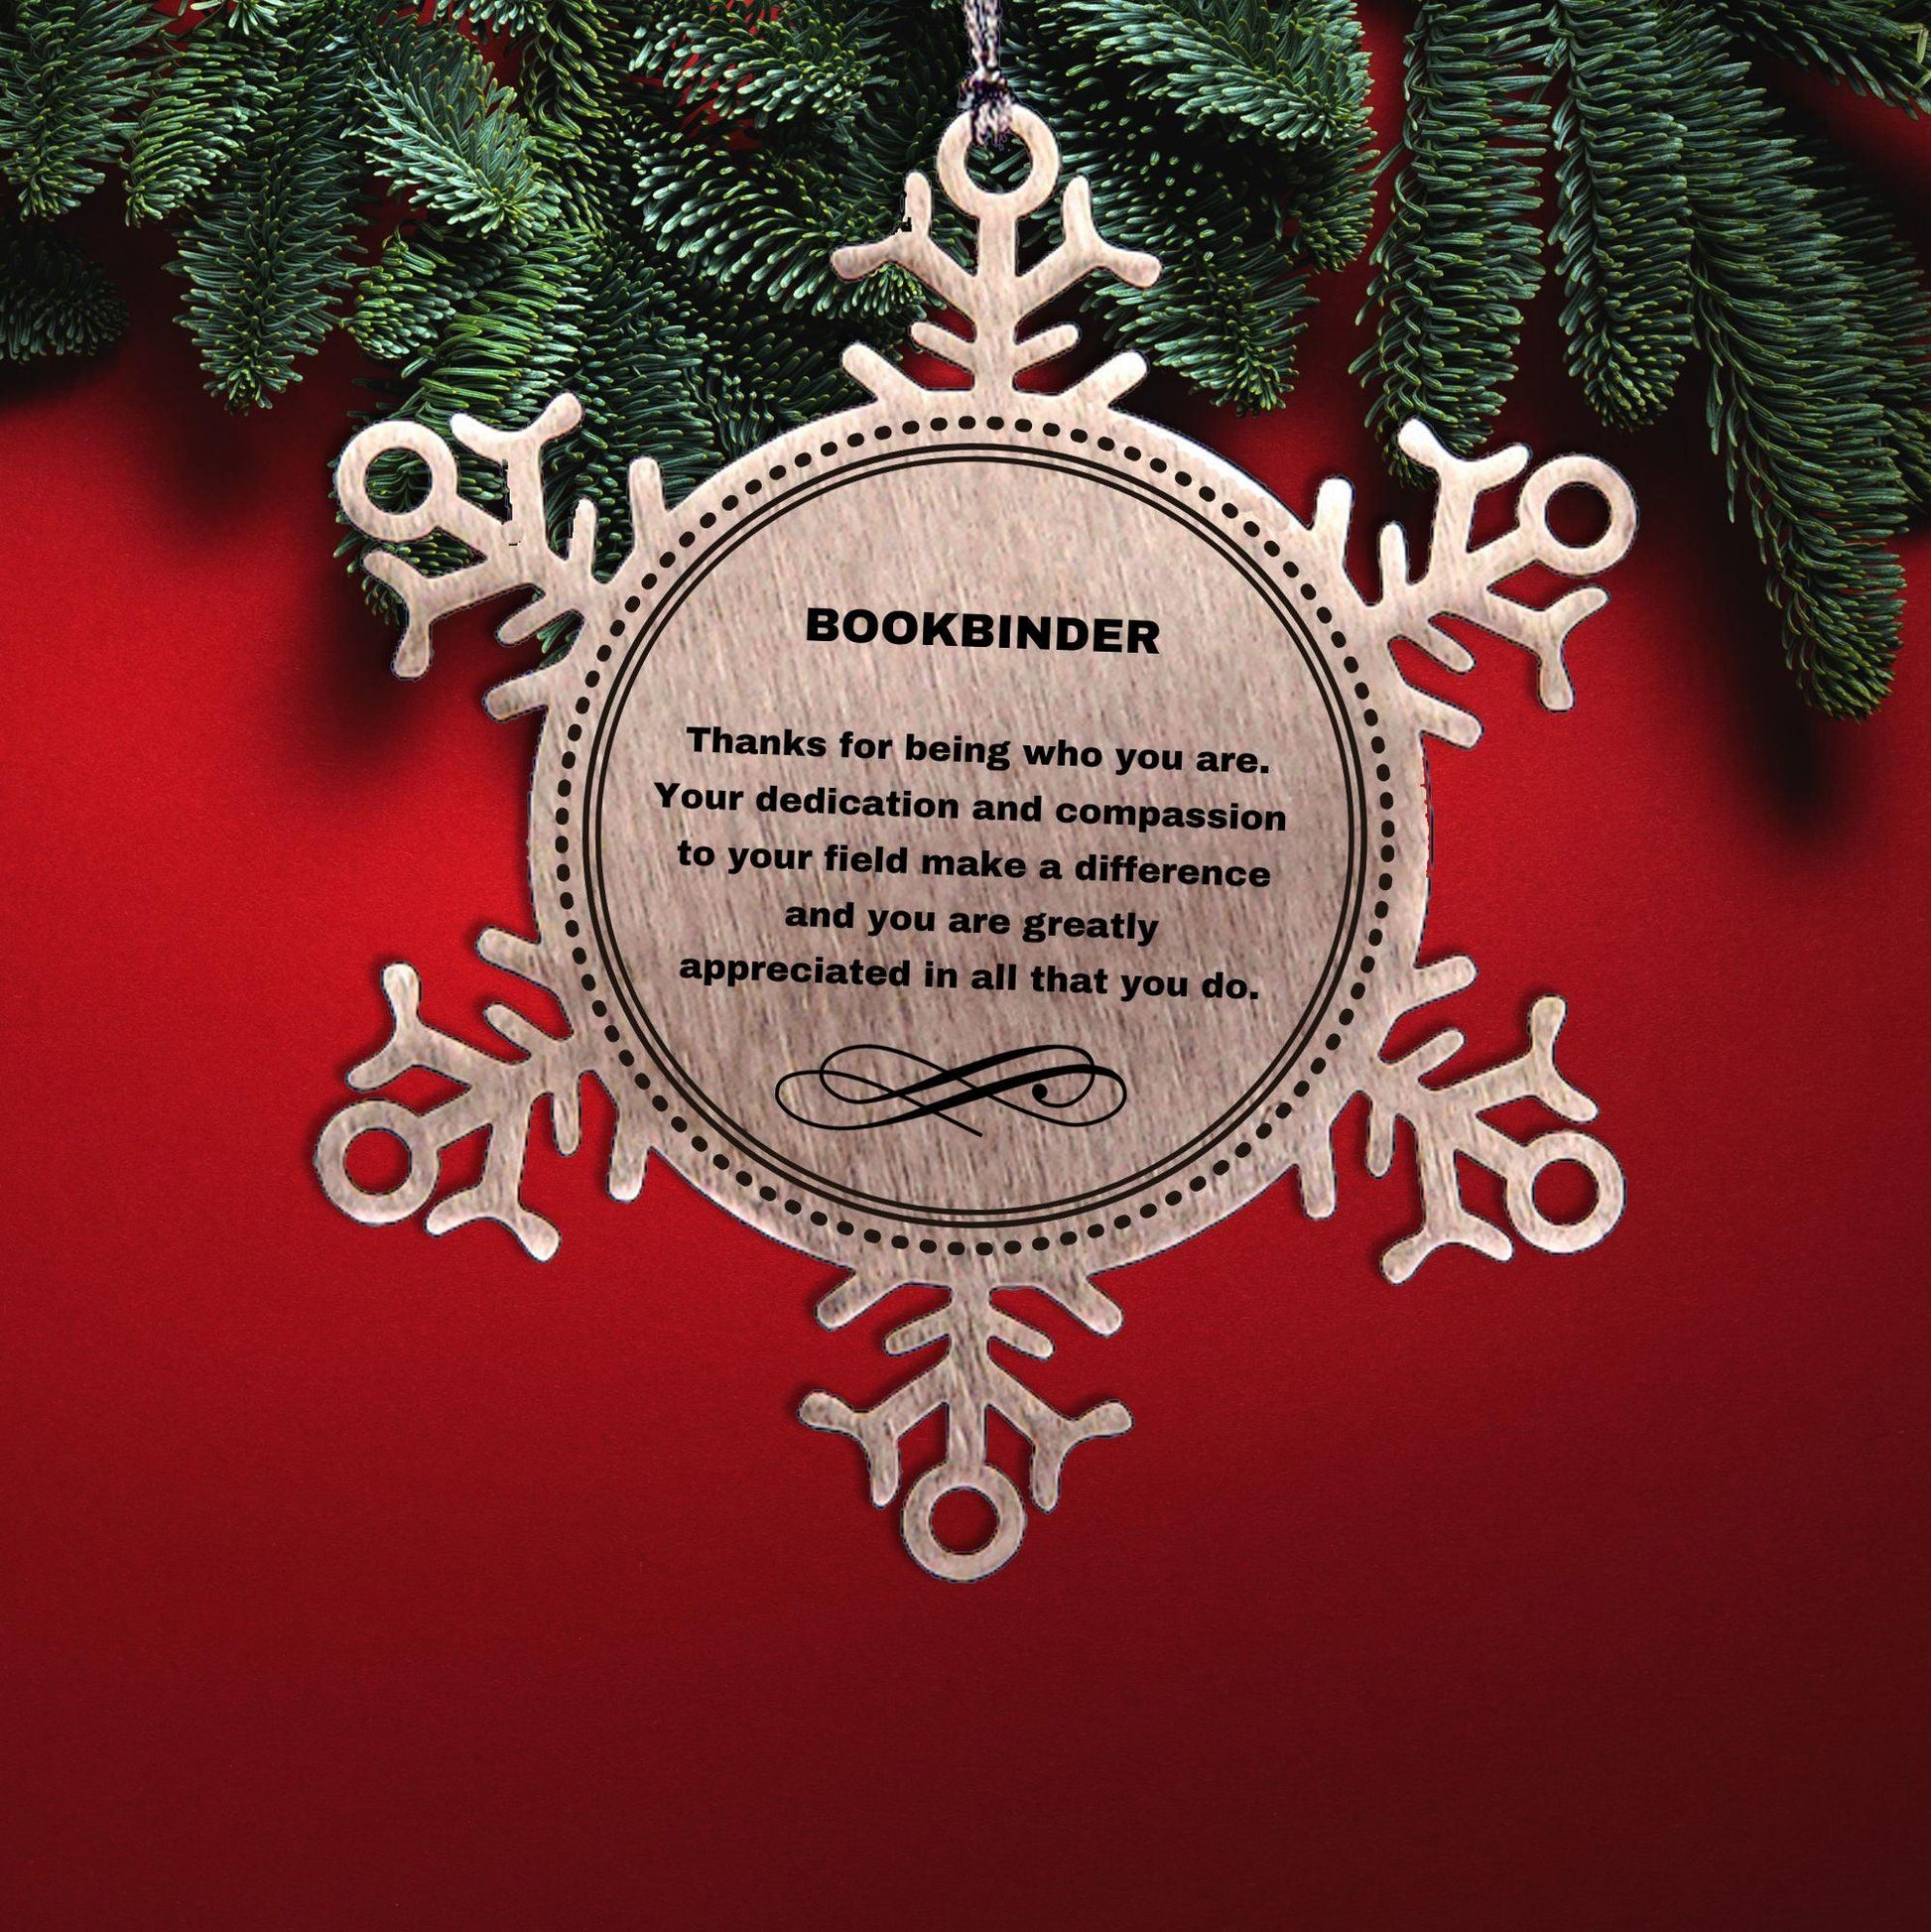 Bookbinder Snowflake Ornament - Thanks for being who you are - Birthday Christmas Tree Gifts Coworkers Colleague Boss - Mallard Moon Gift Shop